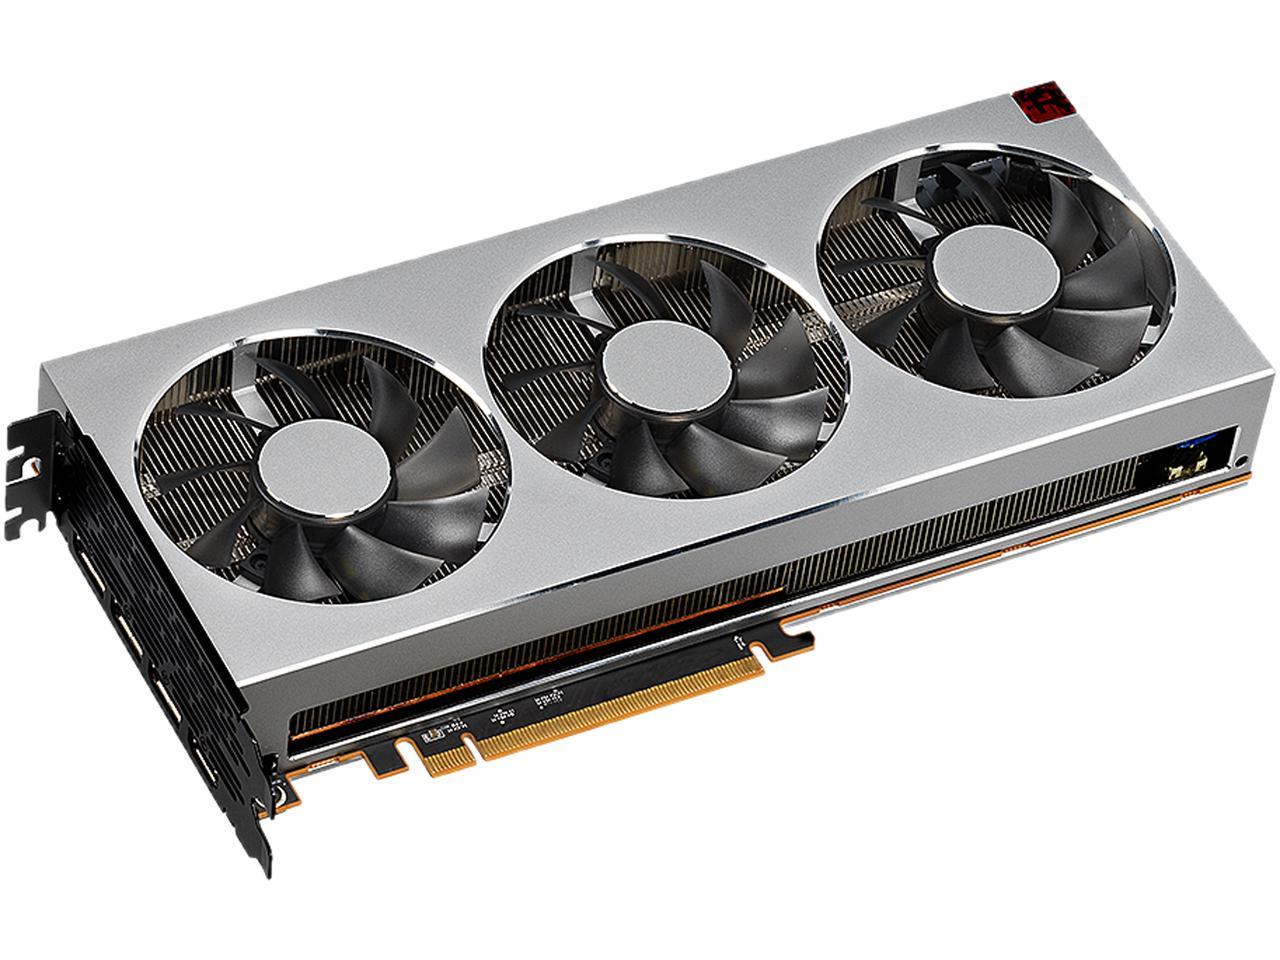 Radeon VII Allegedly Reaches End of Life Status, AMD Neither